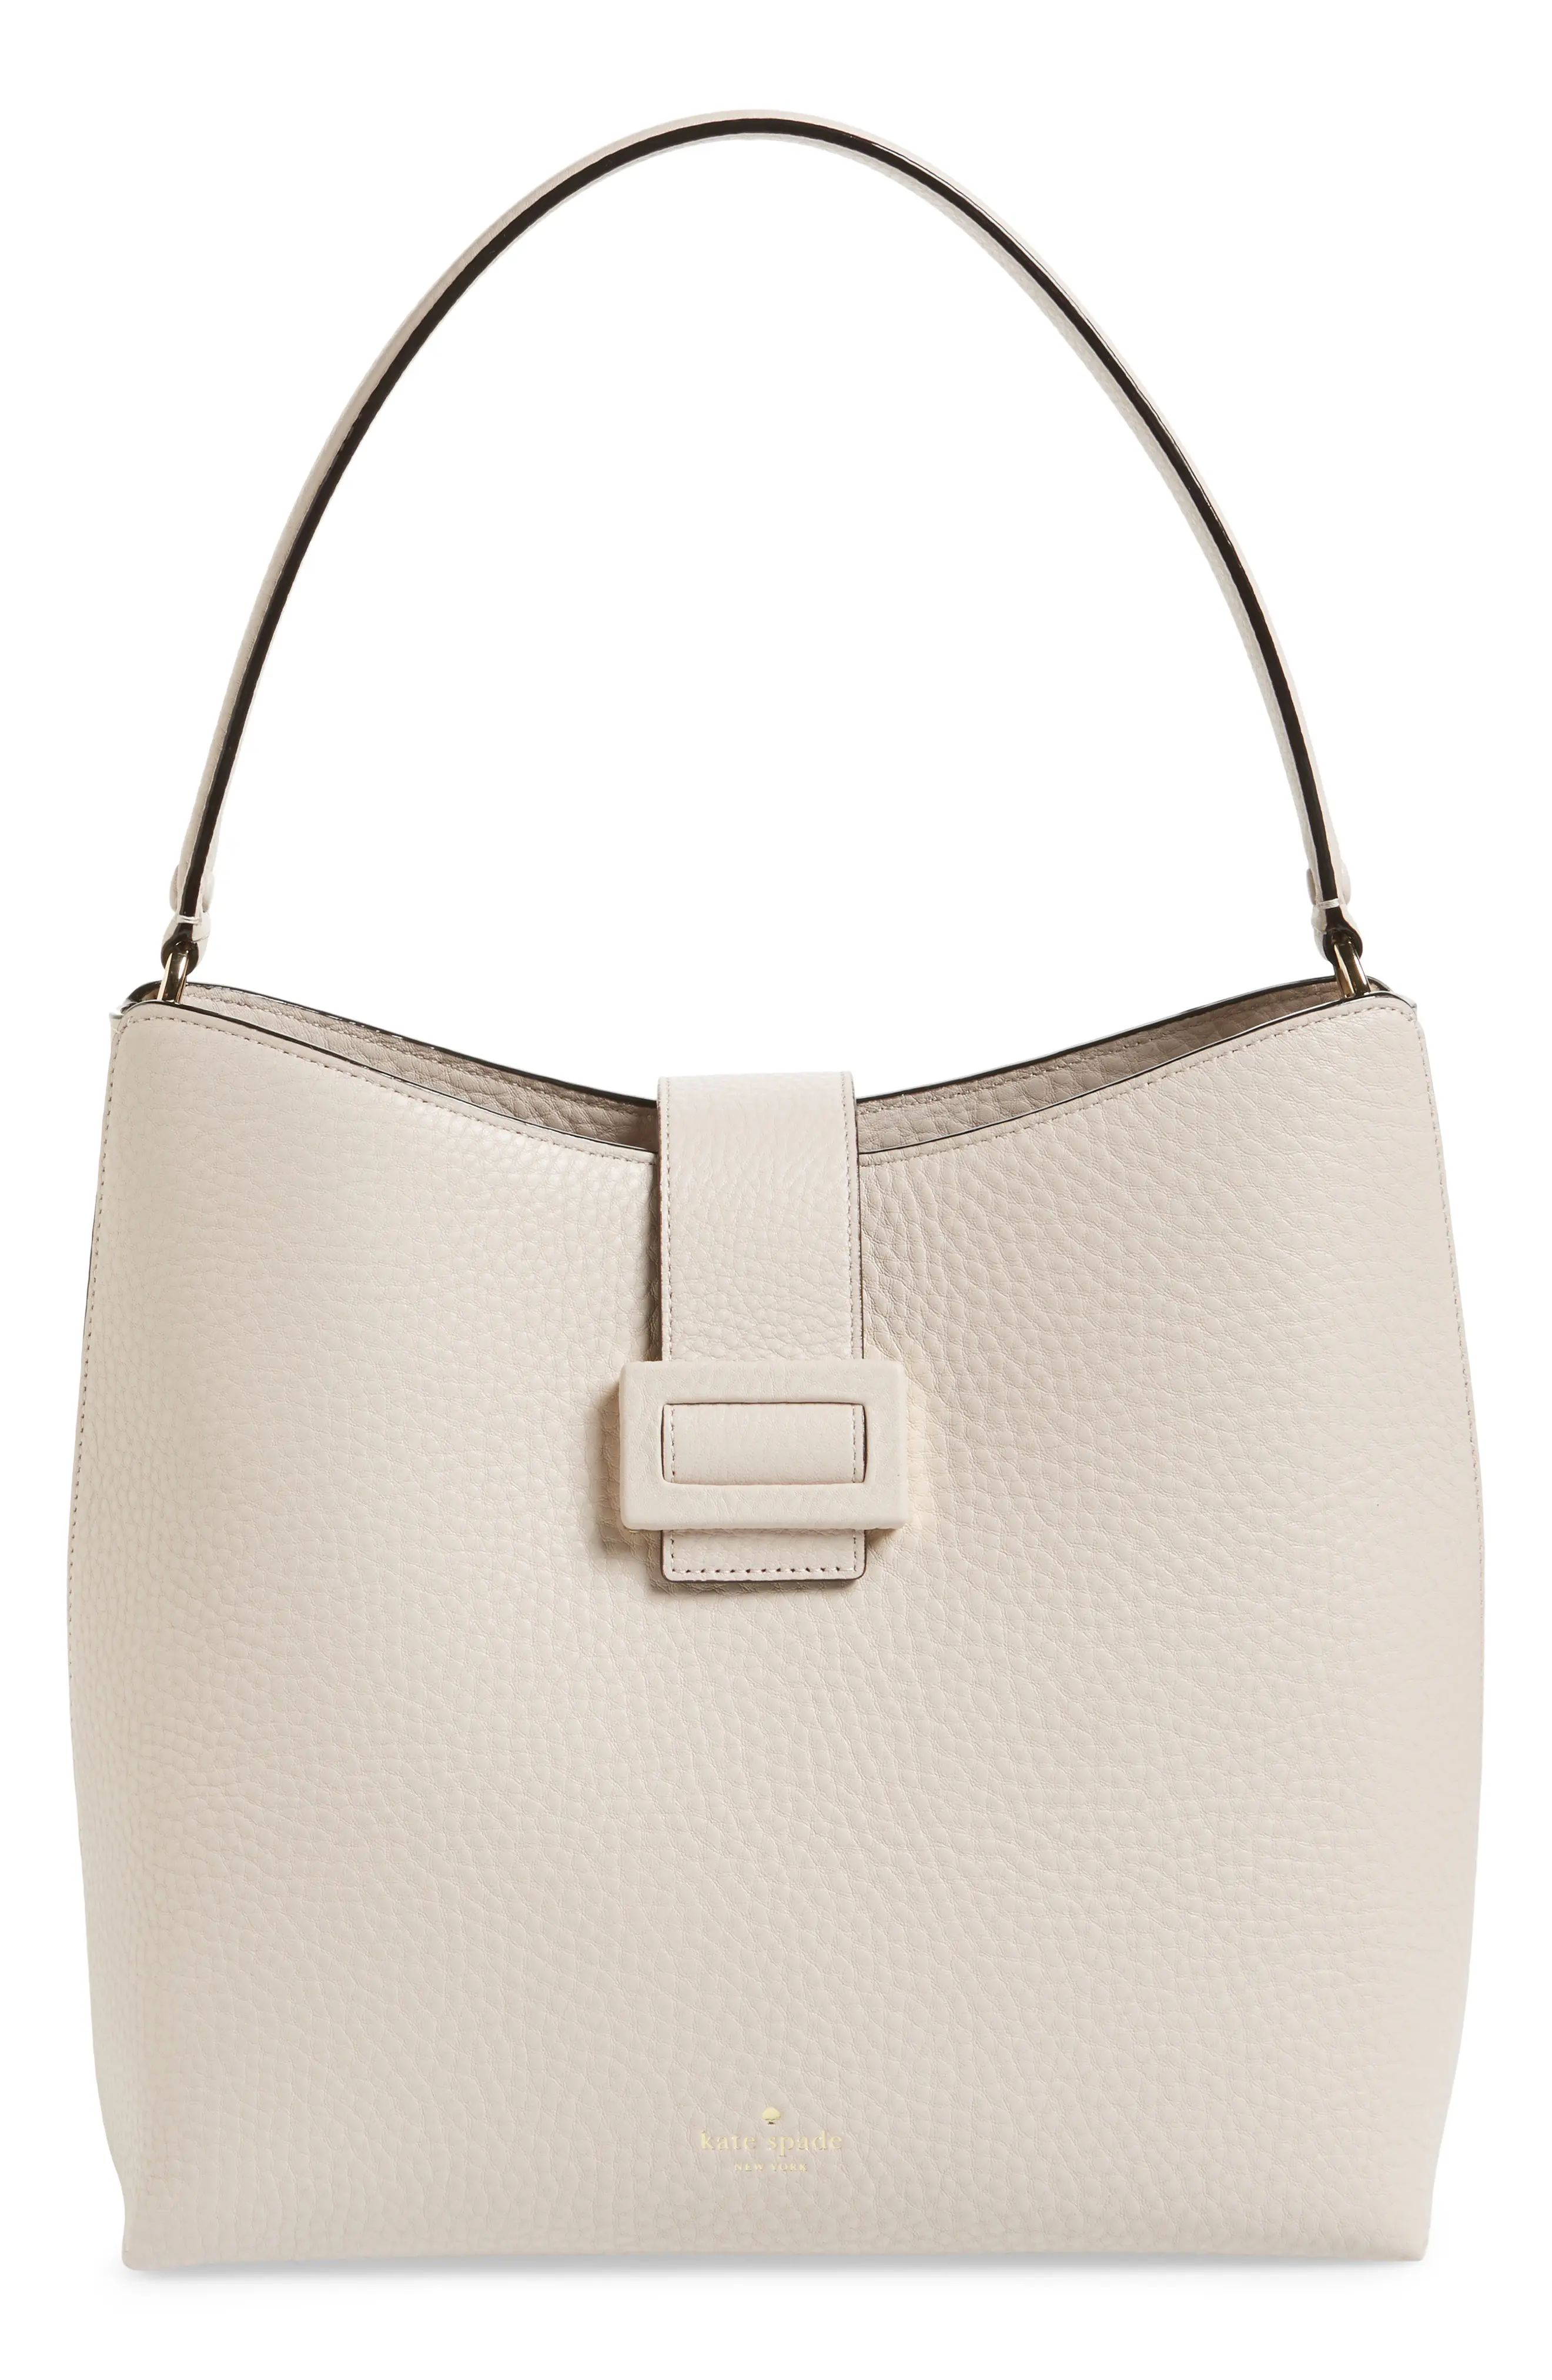 carlyle street – marea leather hobo | Nordstrom